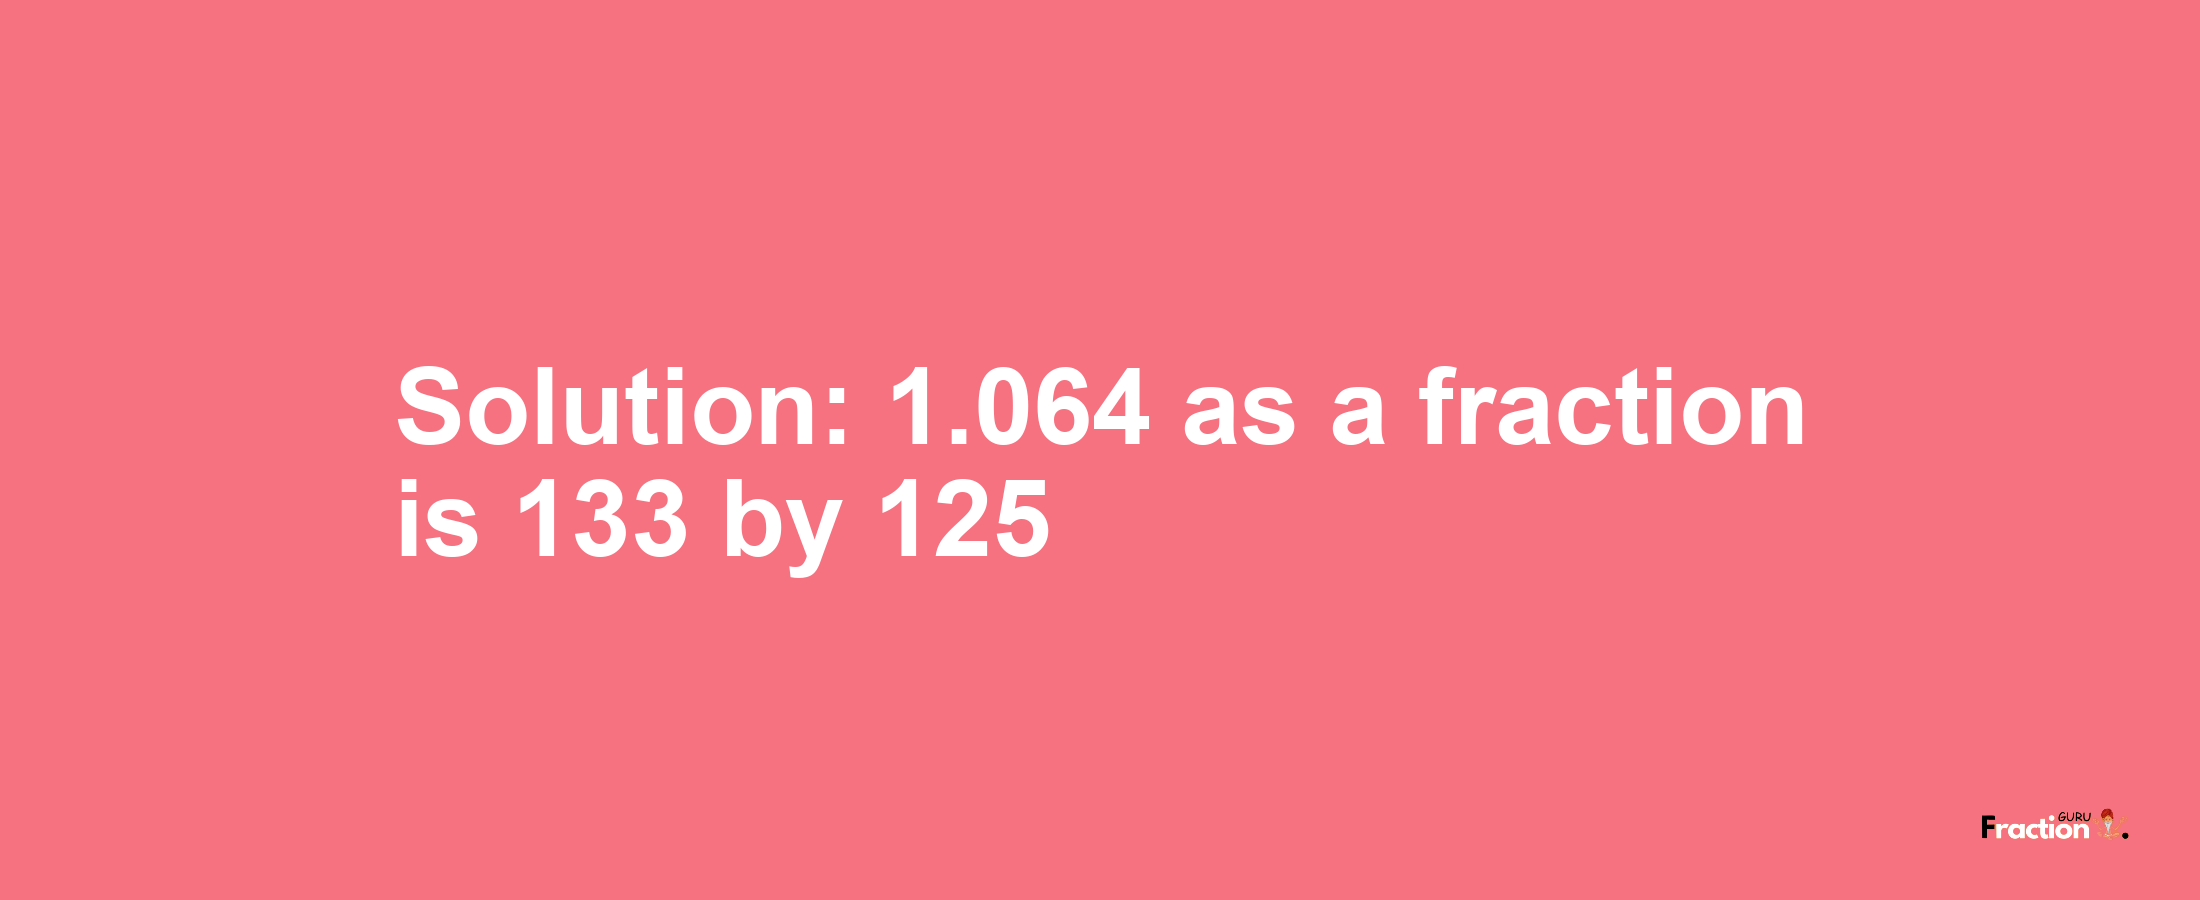 Solution:1.064 as a fraction is 133/125